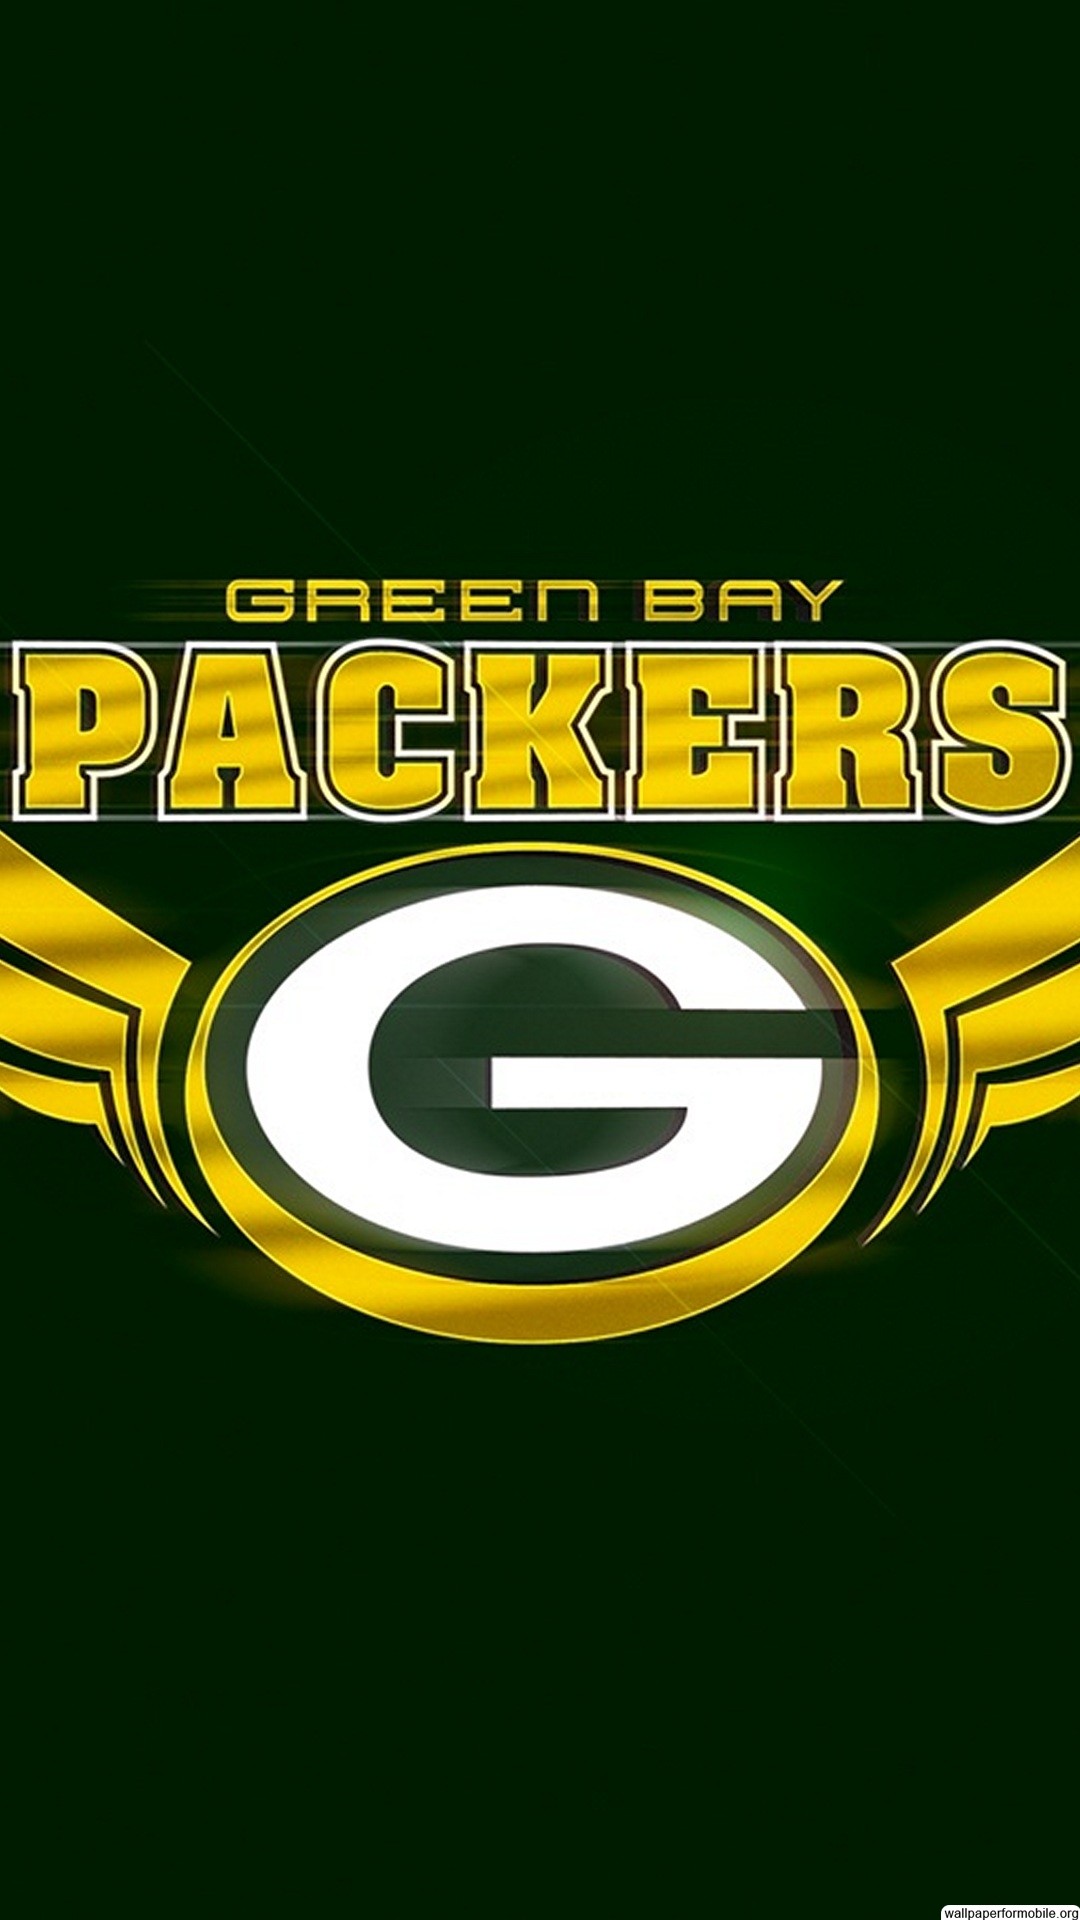 Wallpaper Of Green Bay Packers